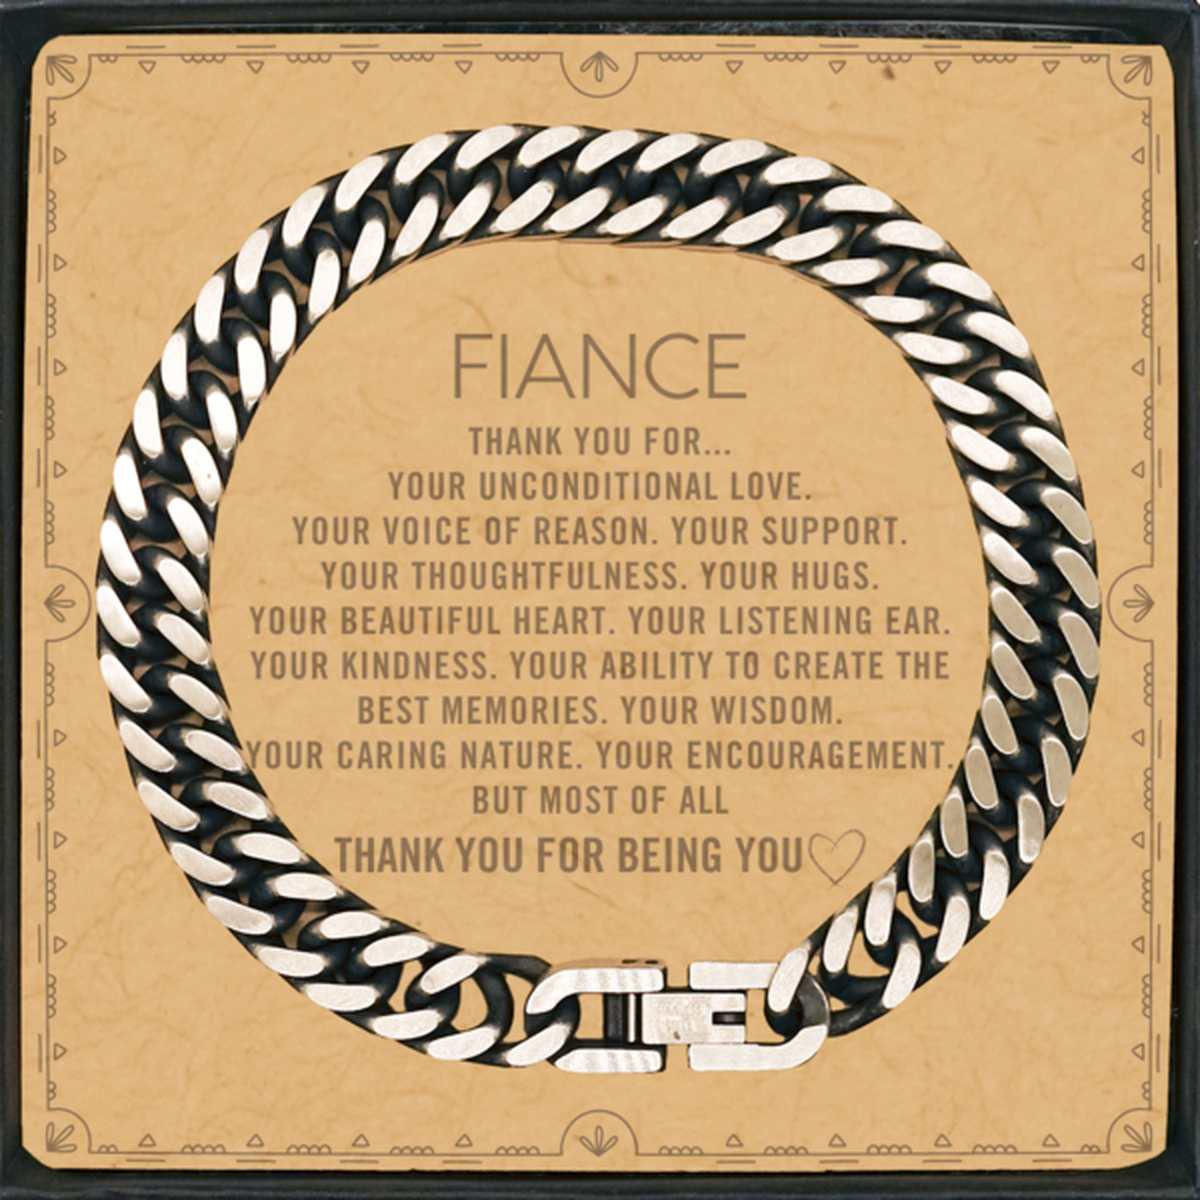 Fiance Cuban Link Chain Bracelet Custom, Message Card Gifts For Fiance Christmas Graduation Birthday Gifts for Men Women Fiance Thank you for Your unconditional love